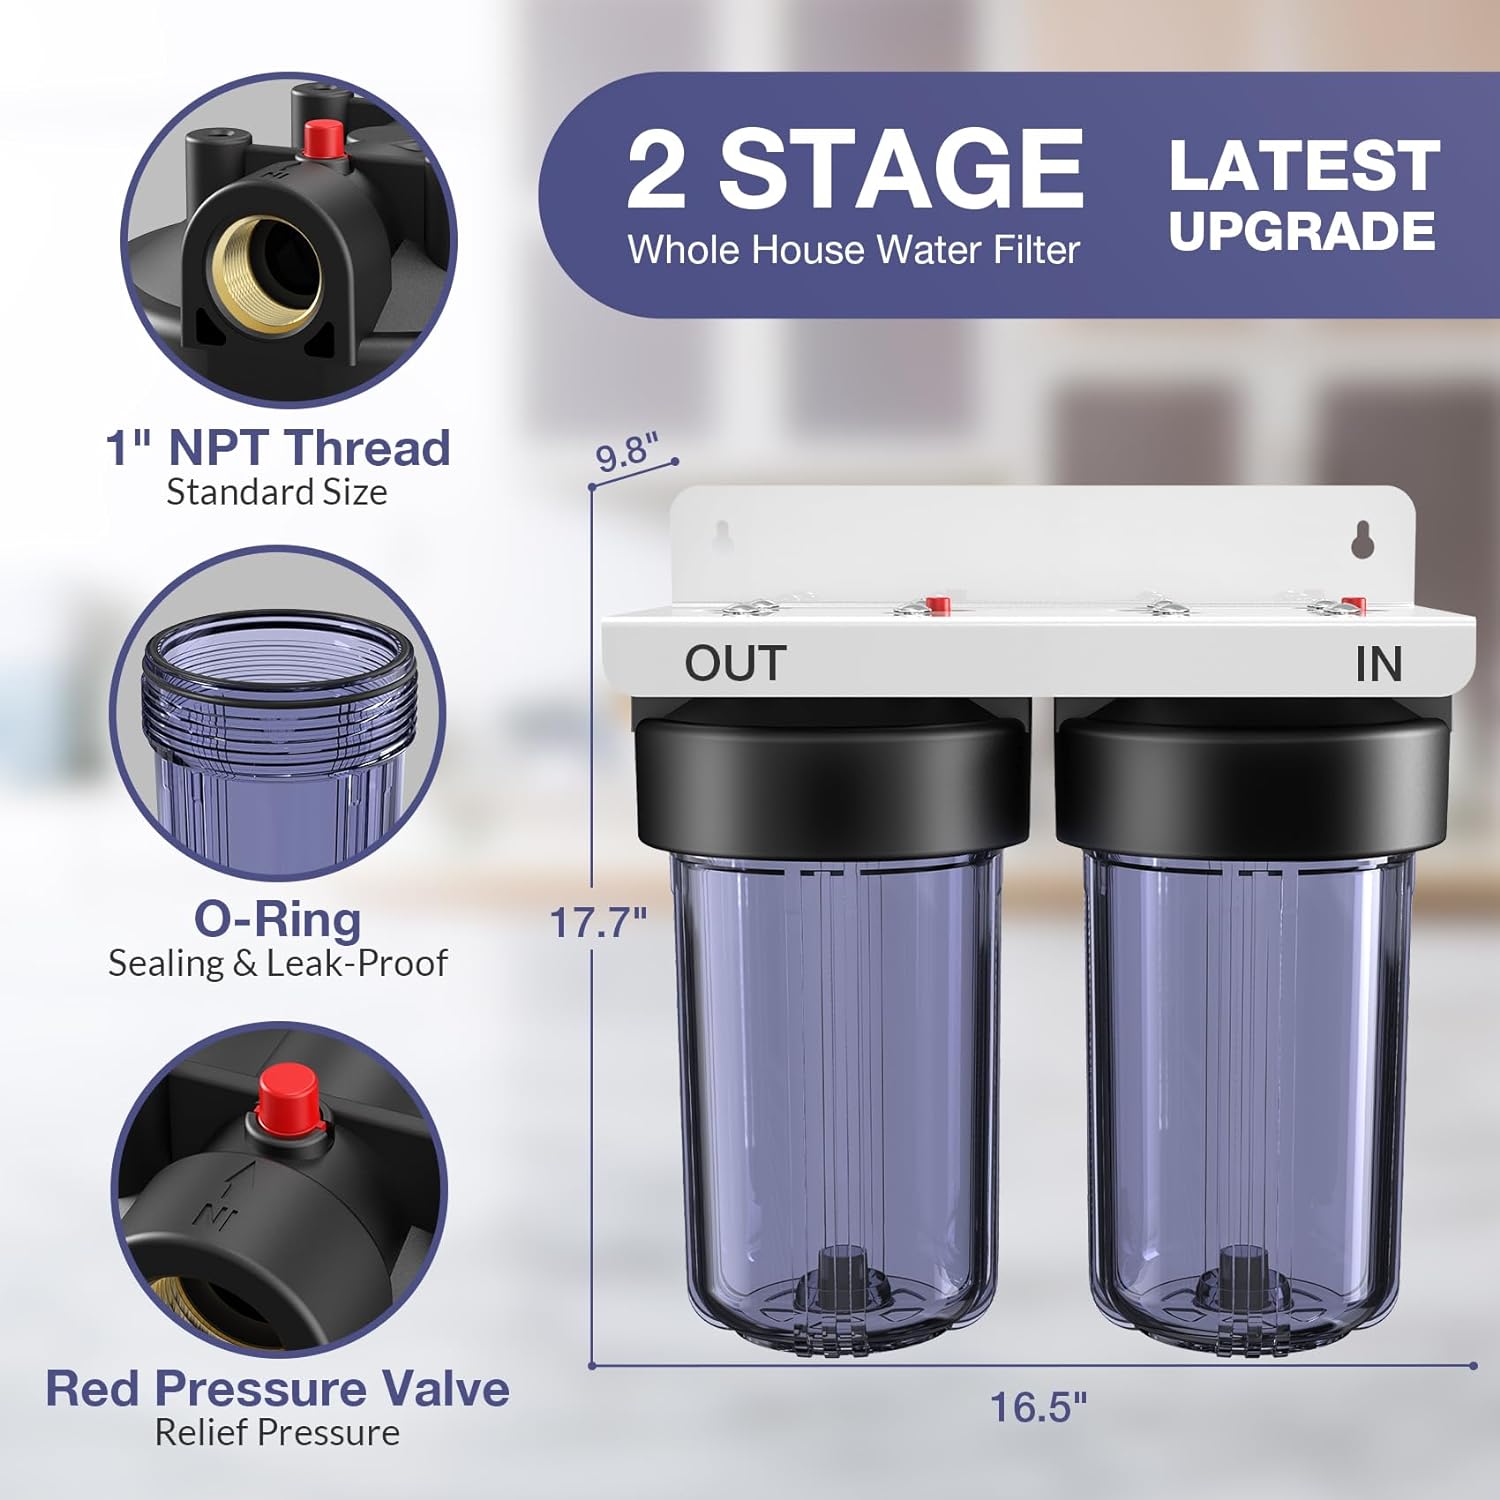 SimPure DB10C-2 5 Micron 2-Stage Whole House Water Filtration System with 4.5 x 10 inch Sediment and Carbon Block Filters